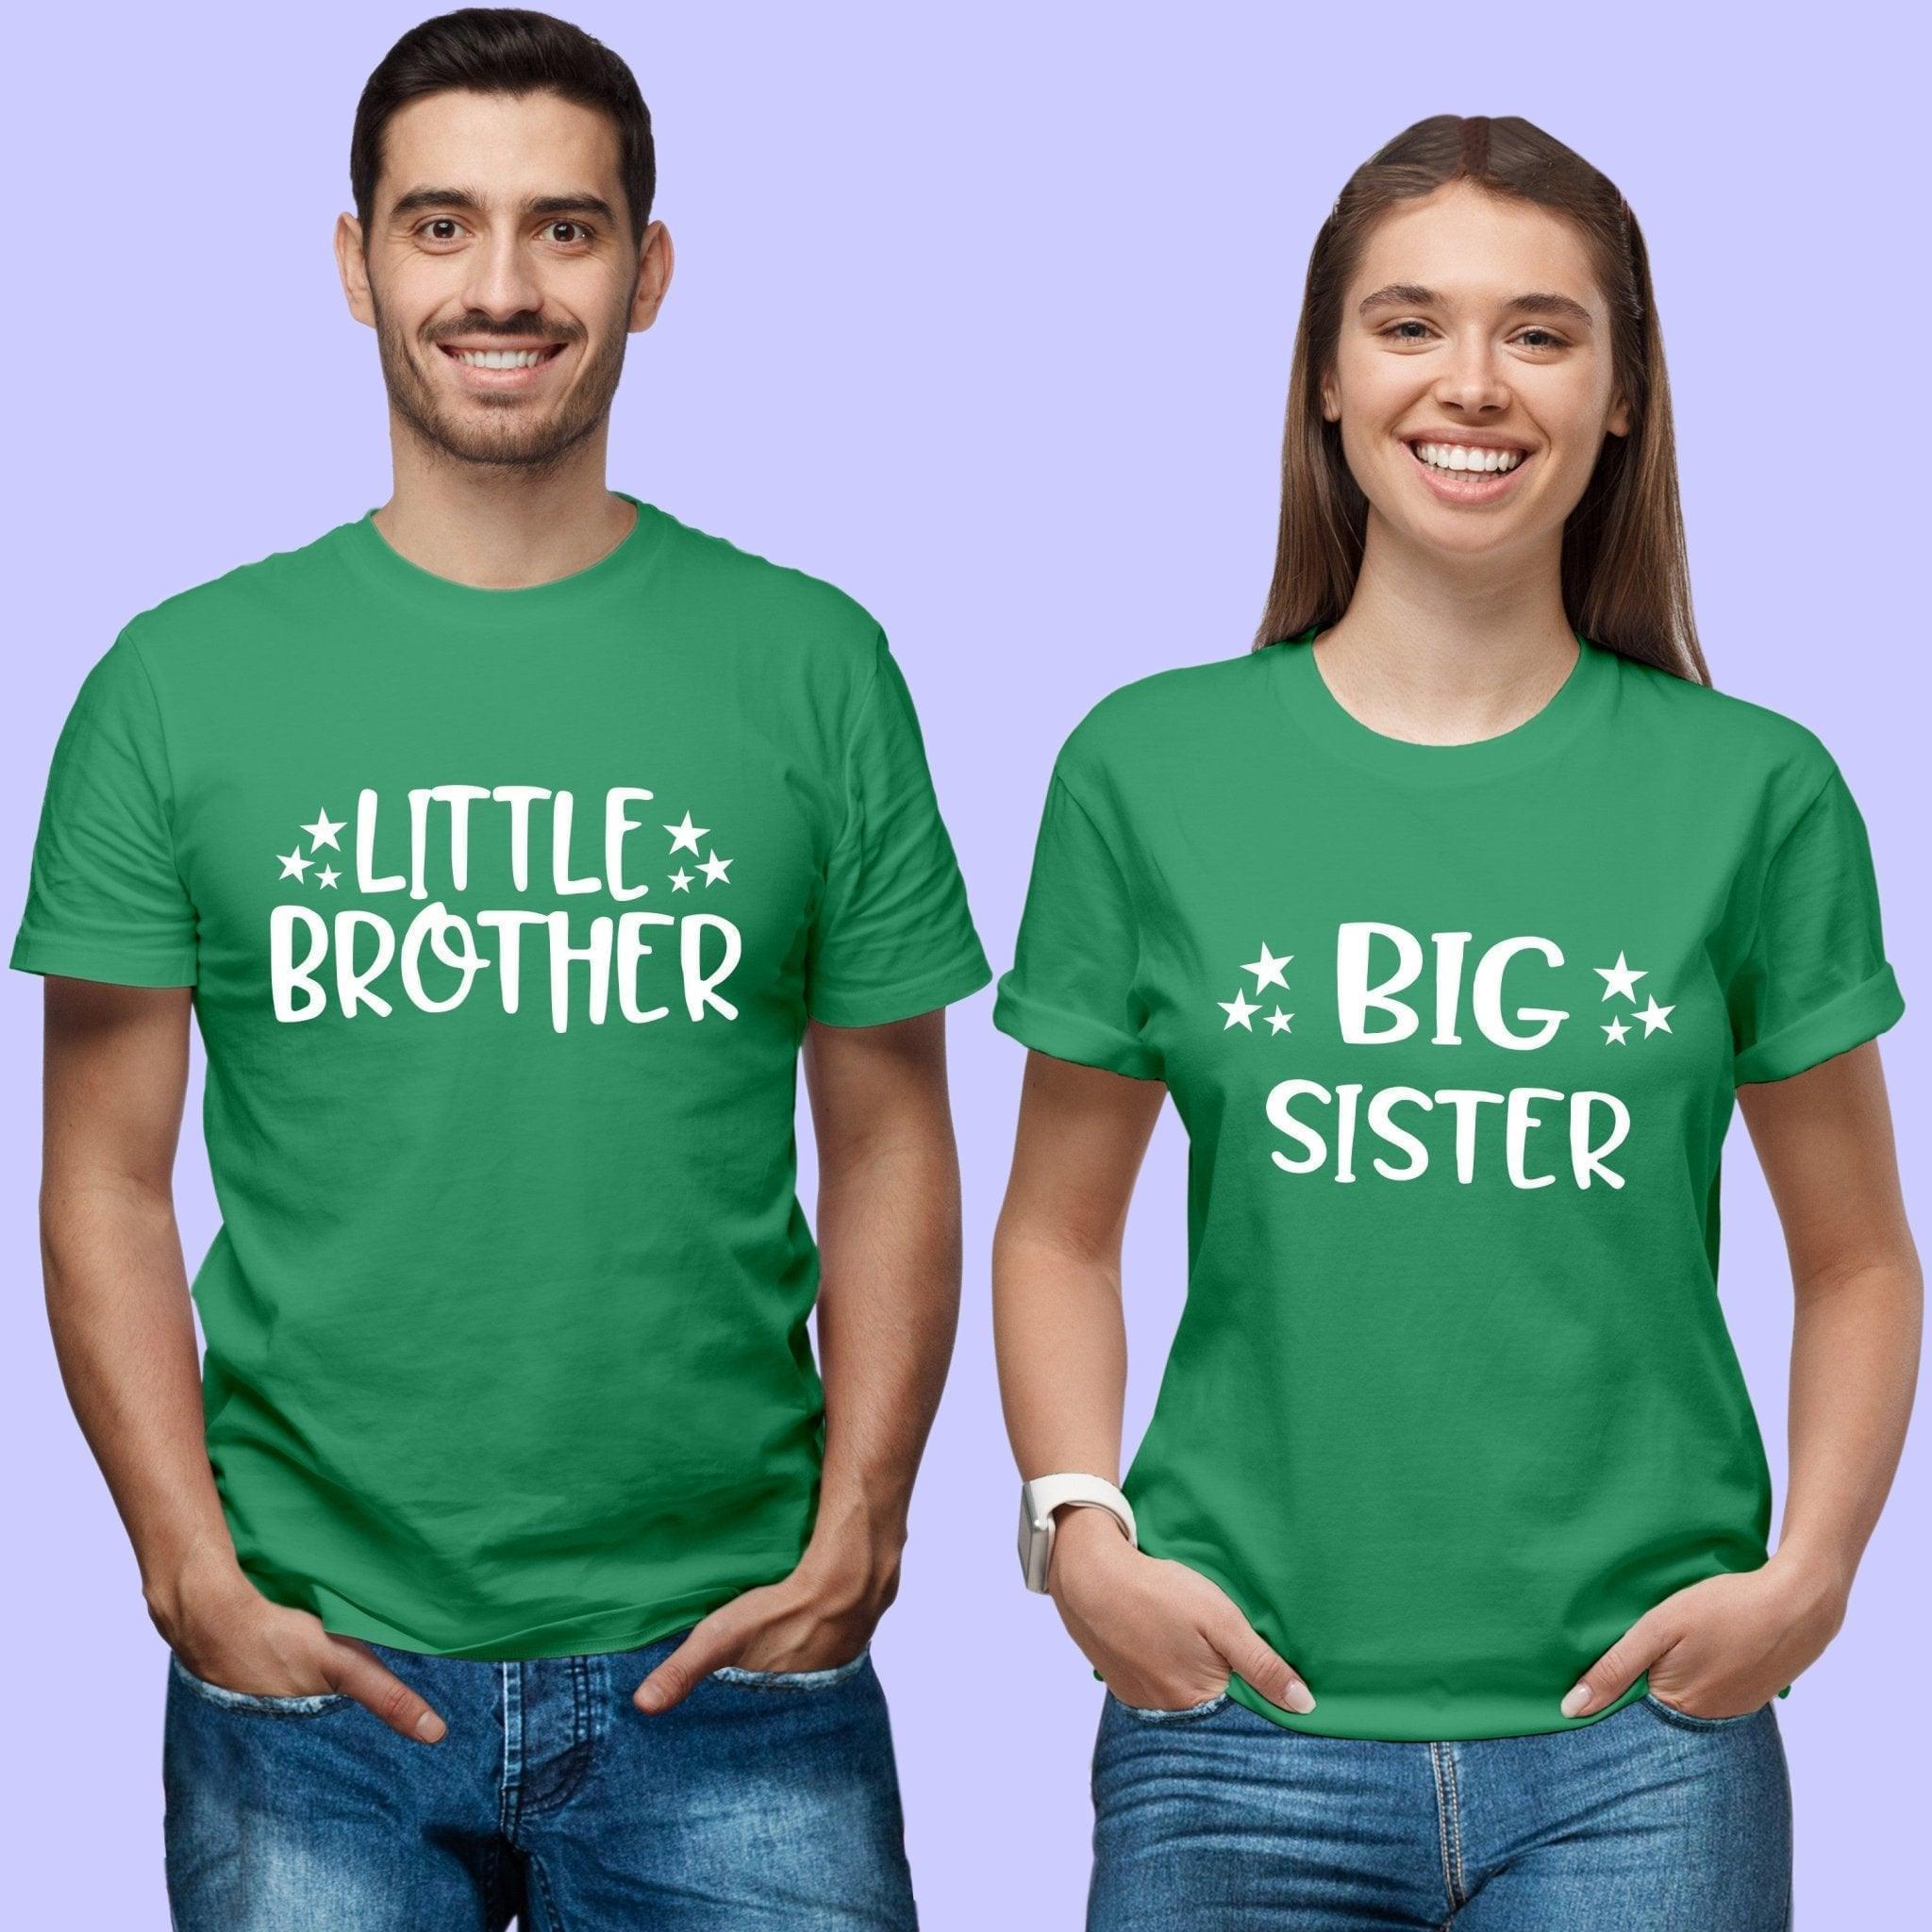 Sibling T Shirt for Adult Brother and Sister in Green Colour - Big Sister Little Brother Variant